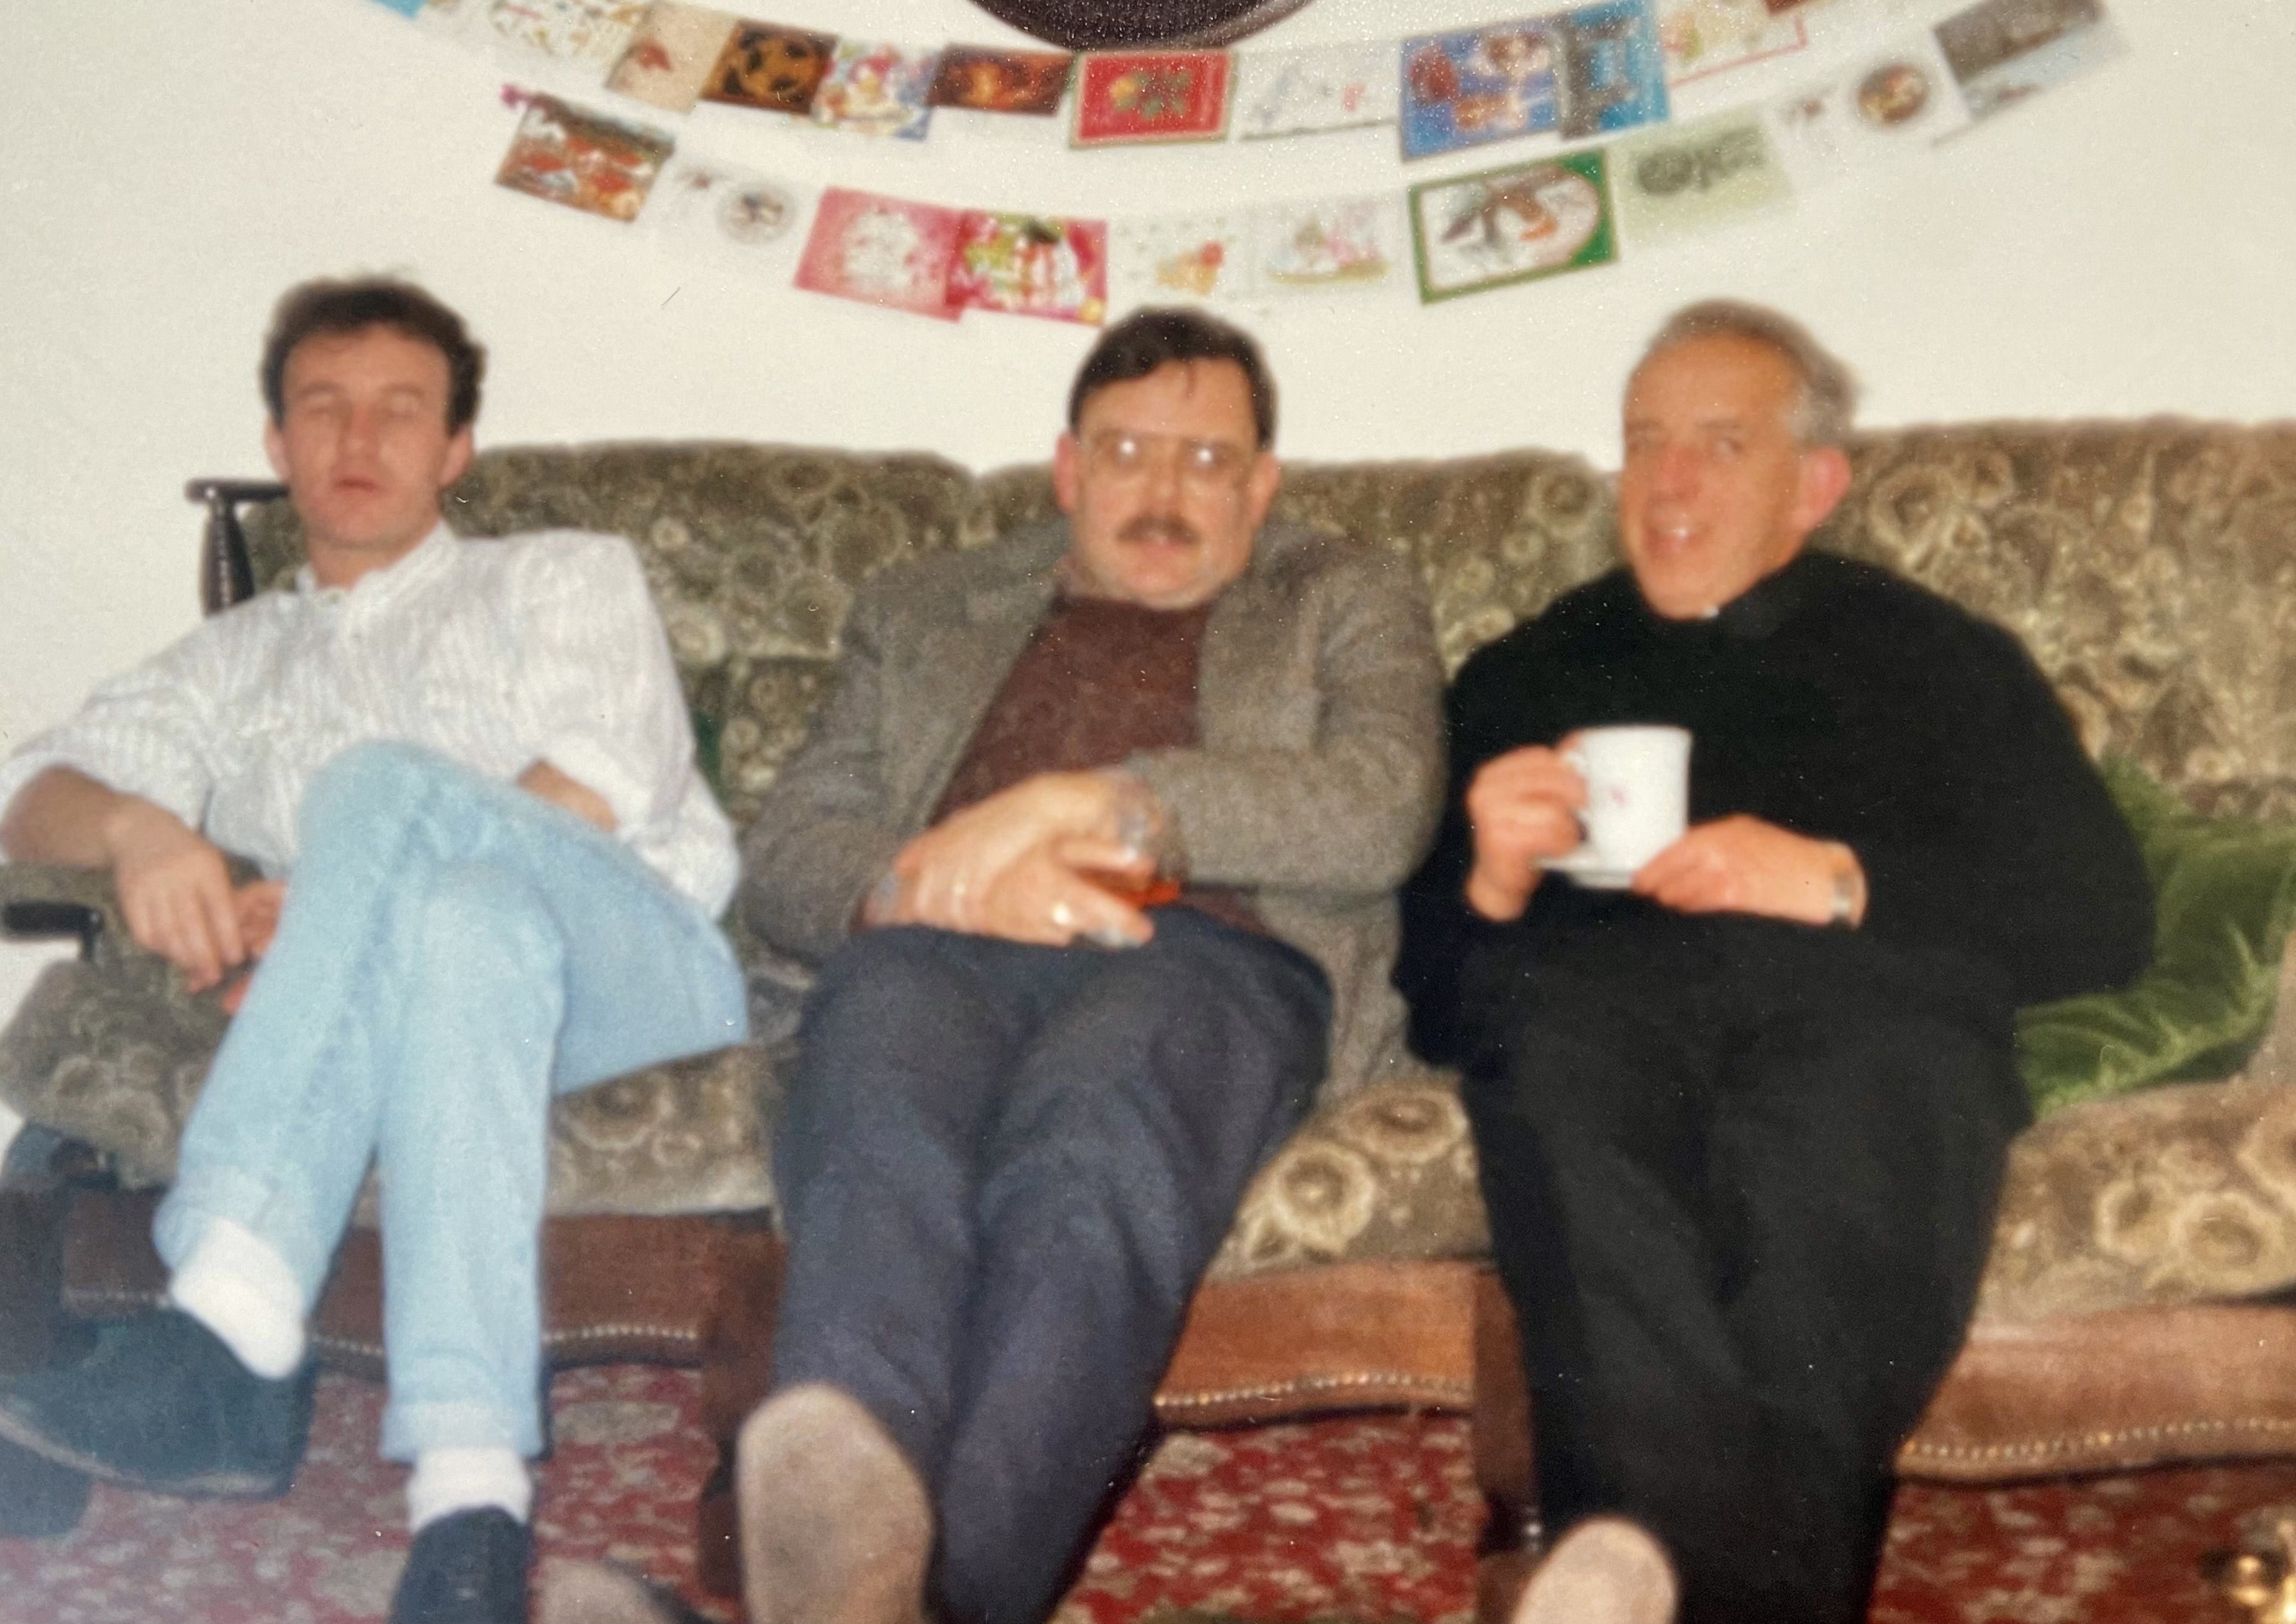 FESTIVE CHEER: Fr Alec Reid (right) in Gerry Adams\' house on a Christmas Eve past with Jim Gibney (left) and Tom Hartley